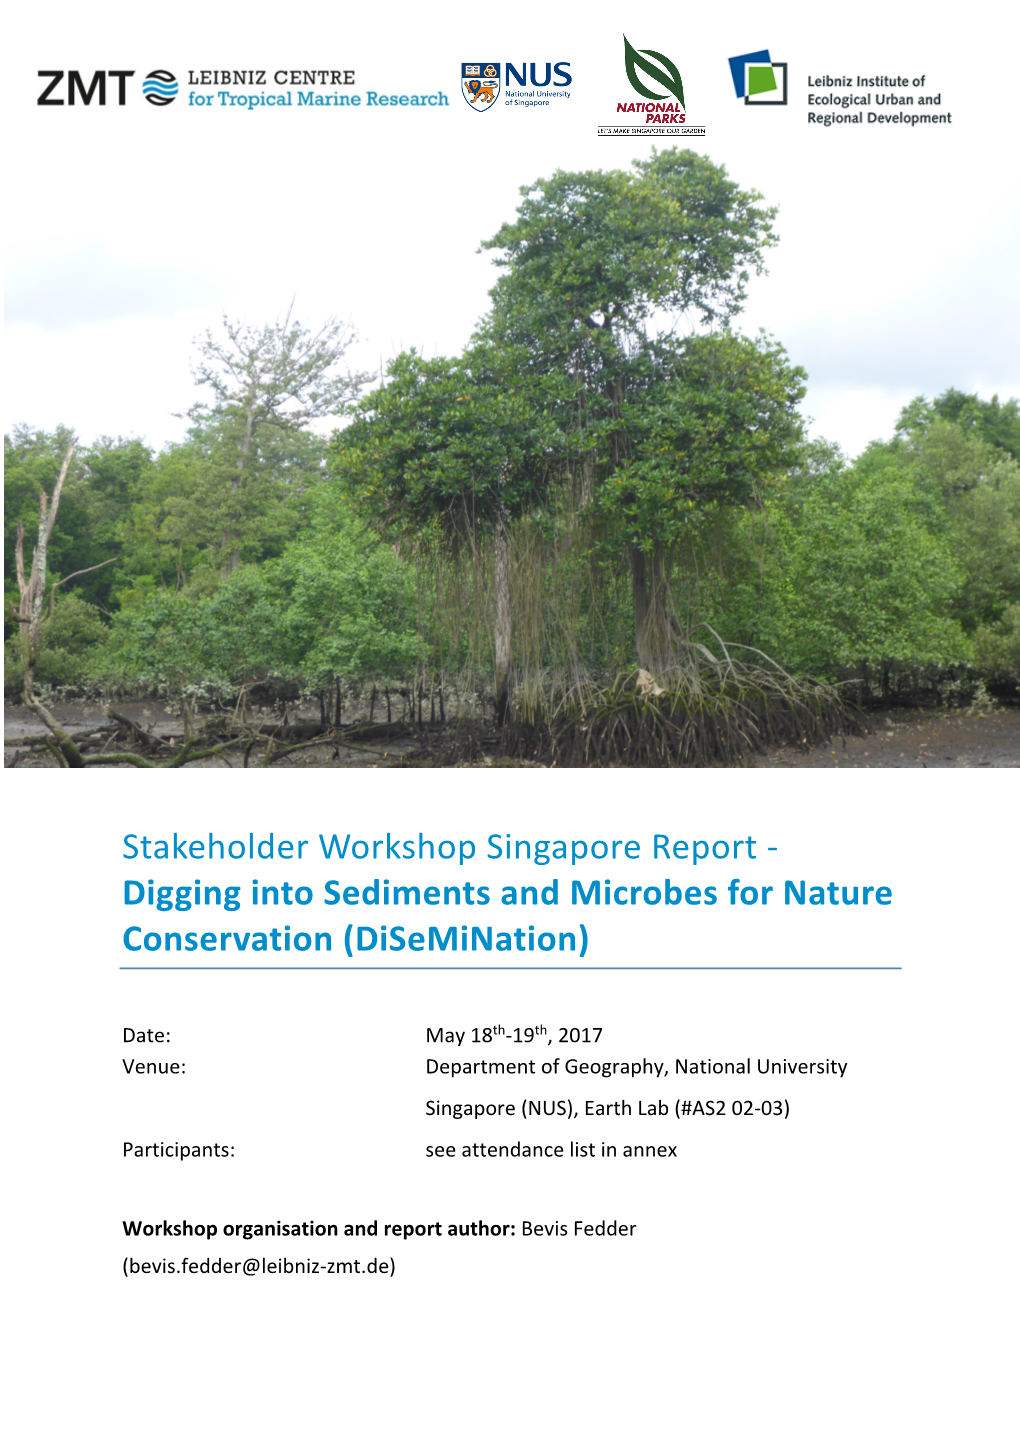 Stakeholder Workshop Singapore Report - Digging Into Sediments and Microbes for Nature Conservation (Disemination)